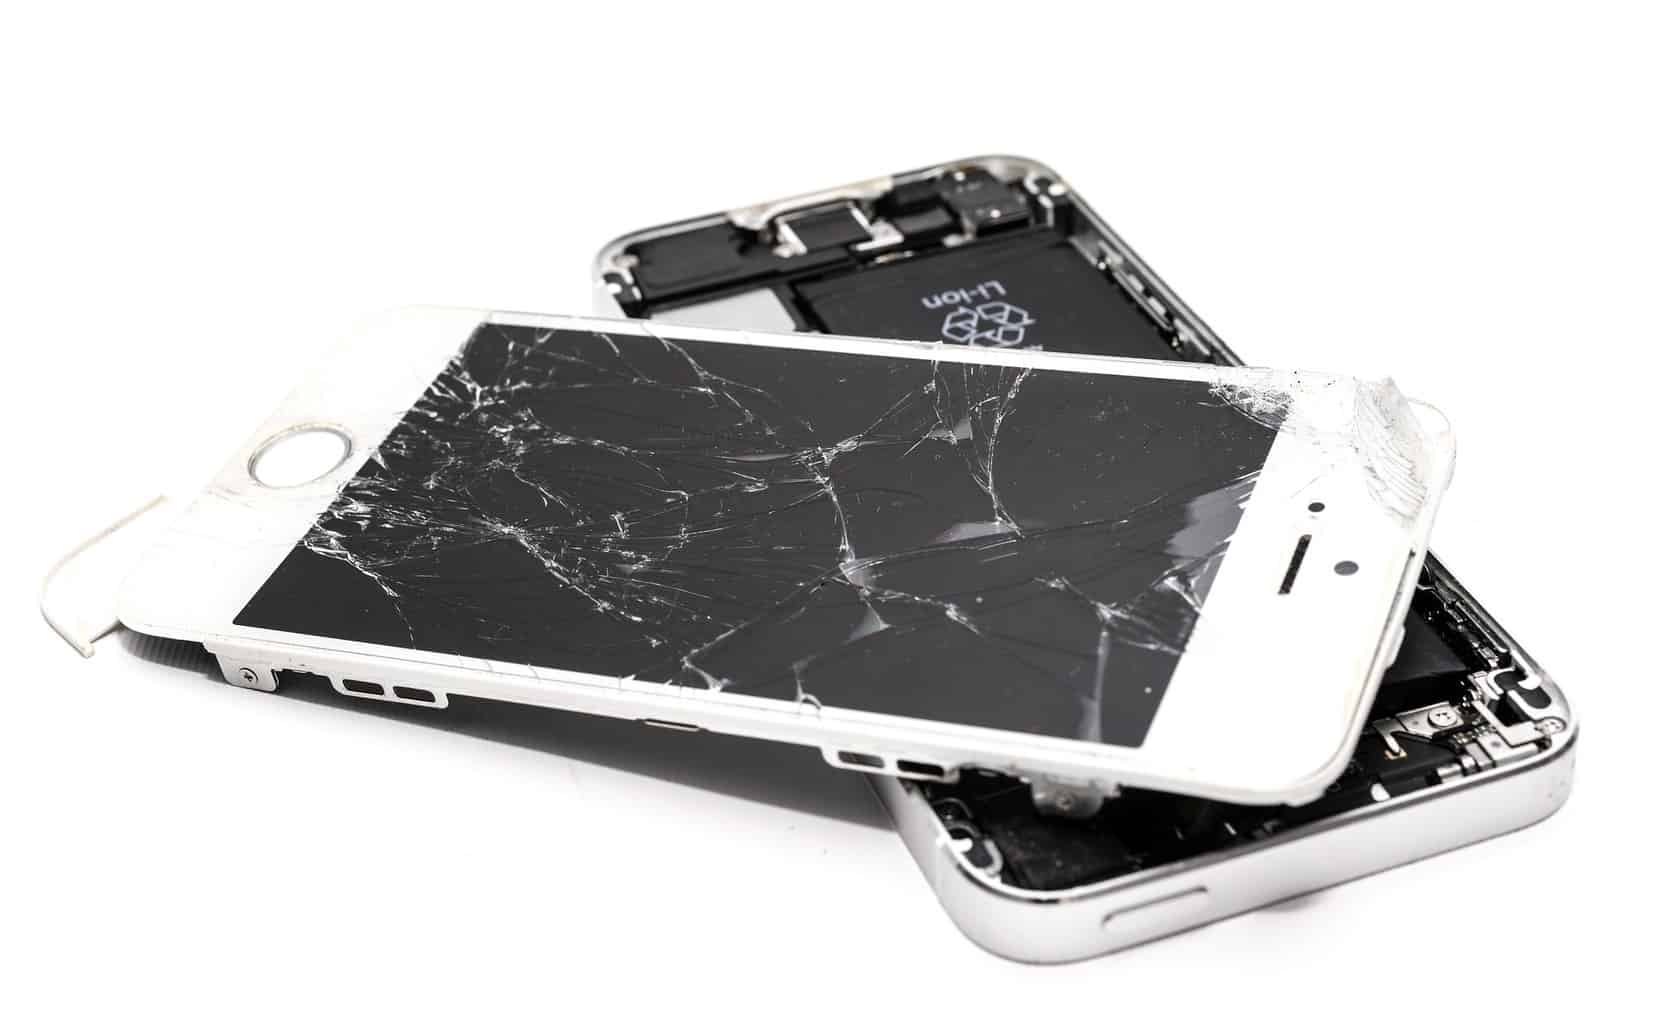 What to Do When Your Tech Device Malfunctions or Breaks? 1